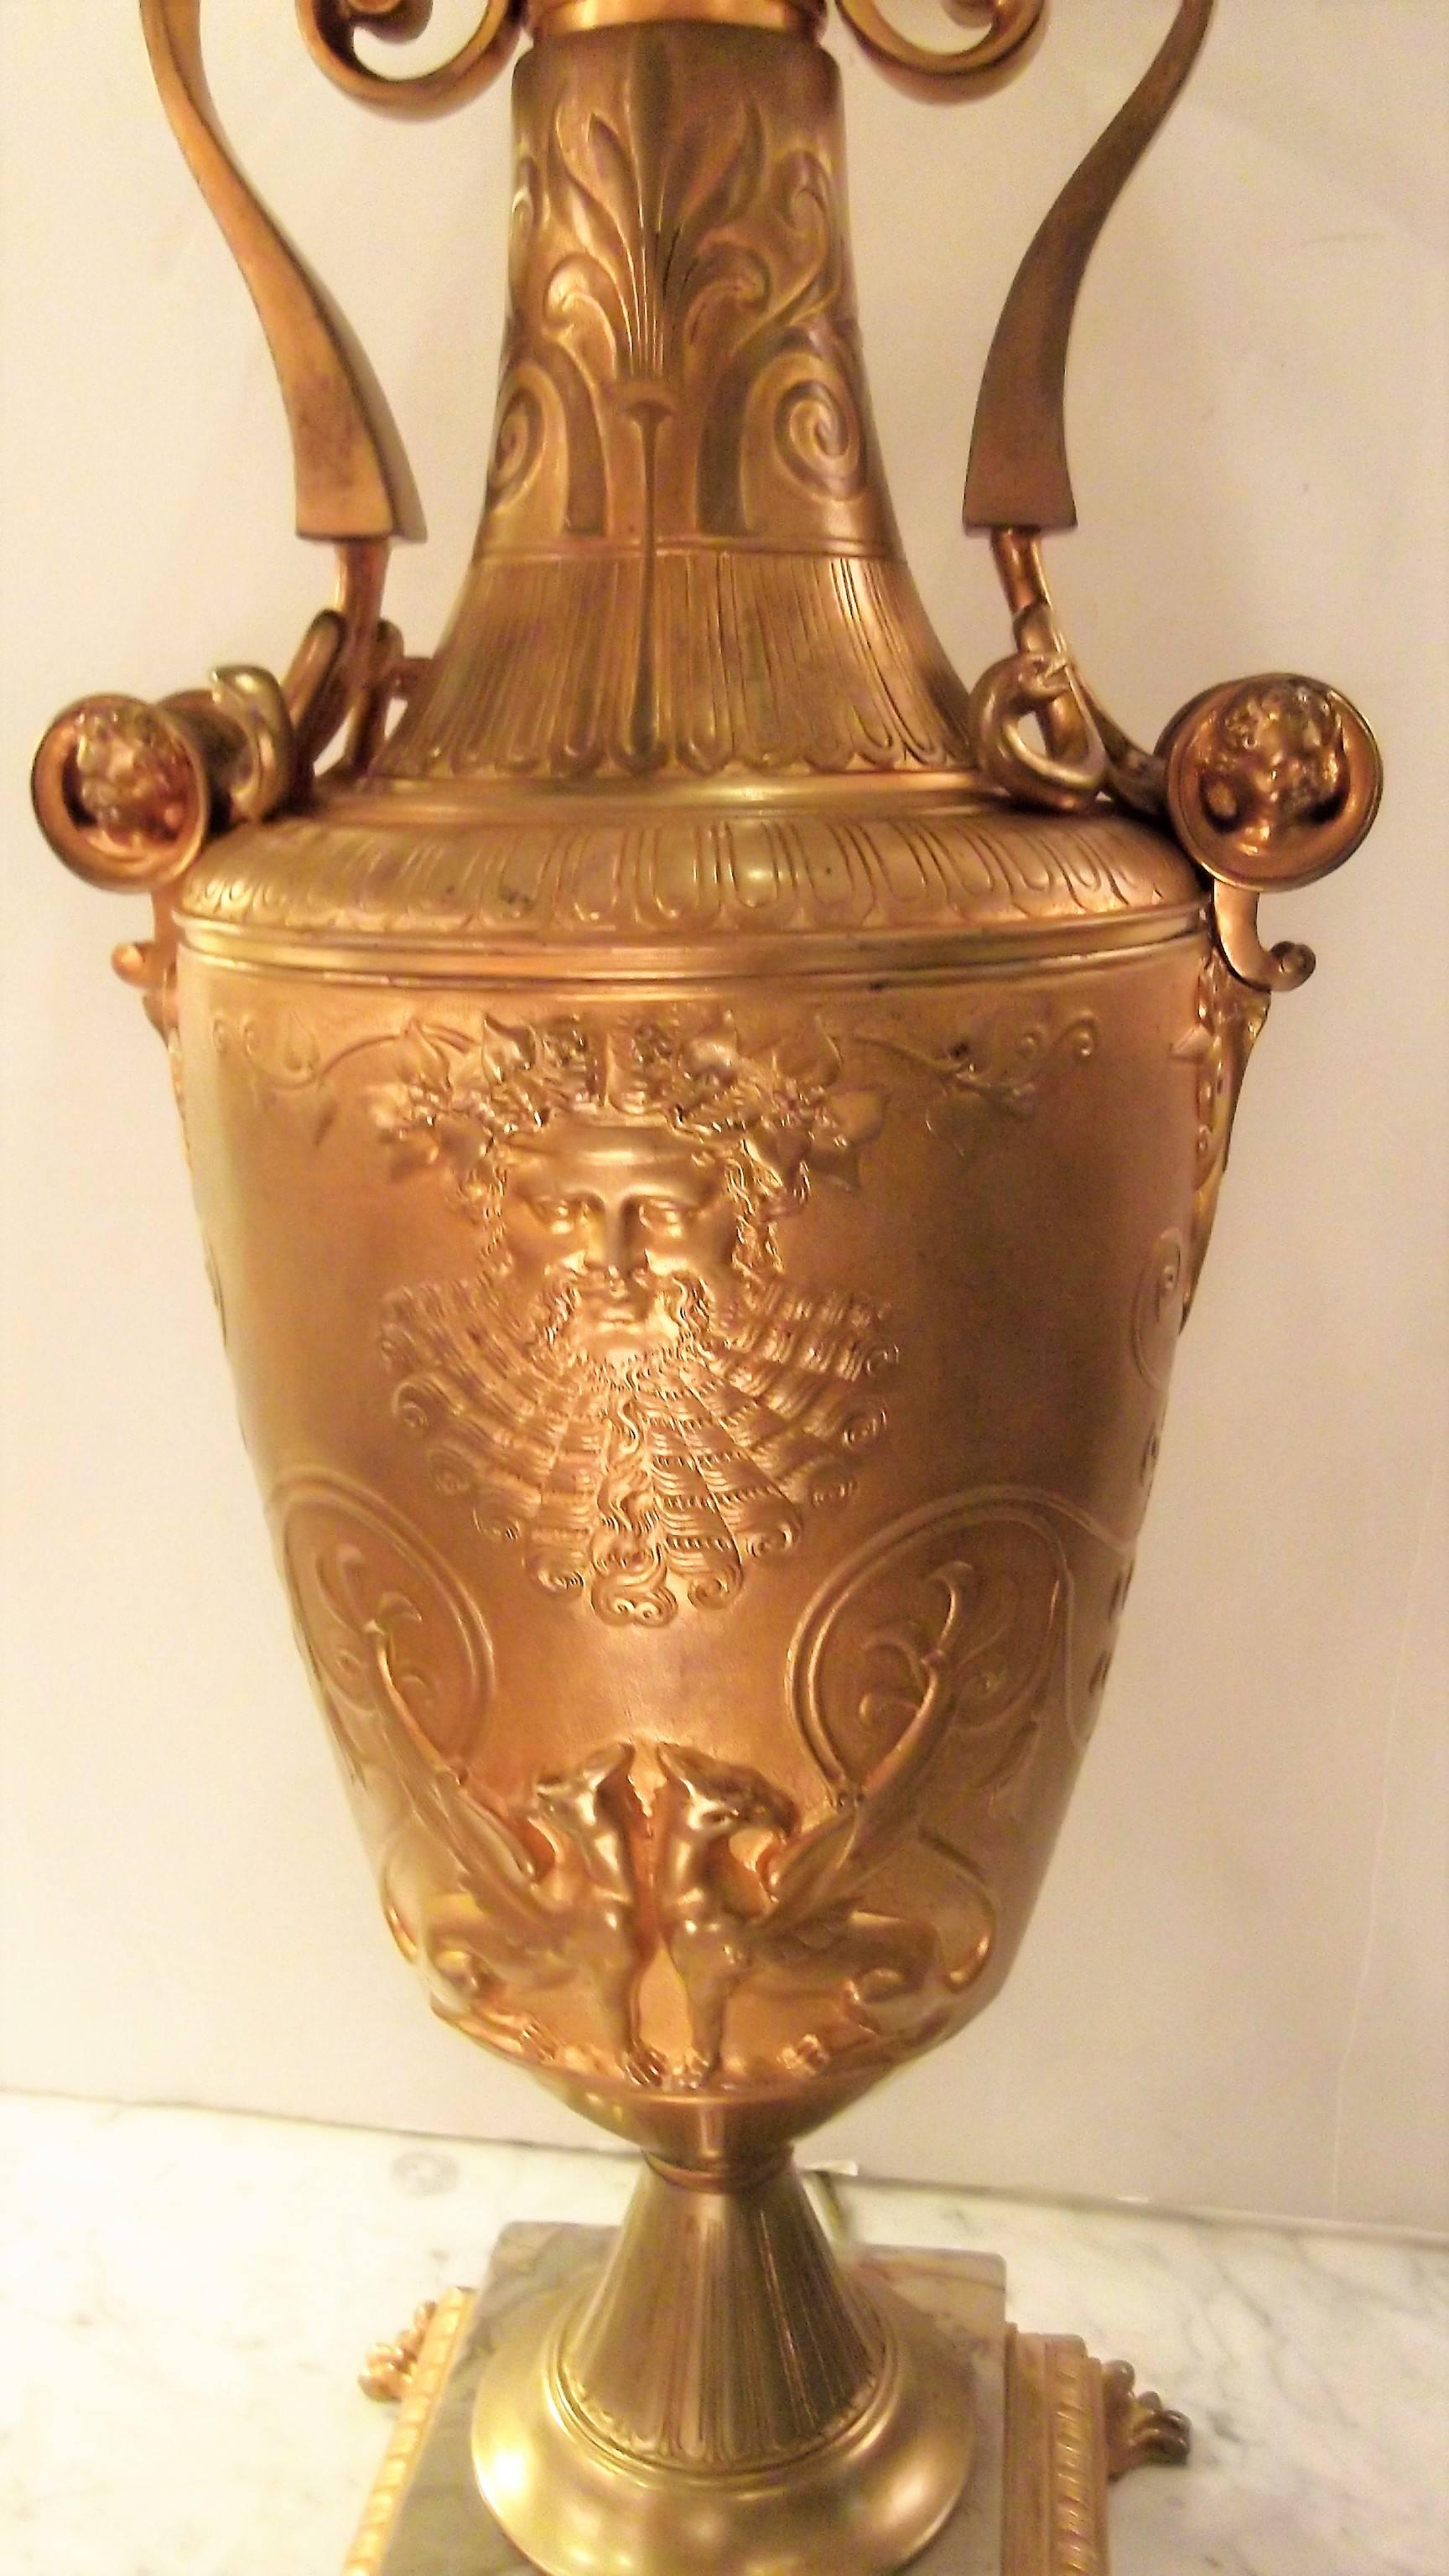 Neoclassic gilt bronze urn made in France, circa 1865. Beautifully cast bronze urn with double handles with neoclassic faces on the front and back. The handles have applied serpant decoration. The base has an inset of a neutral color marble resting